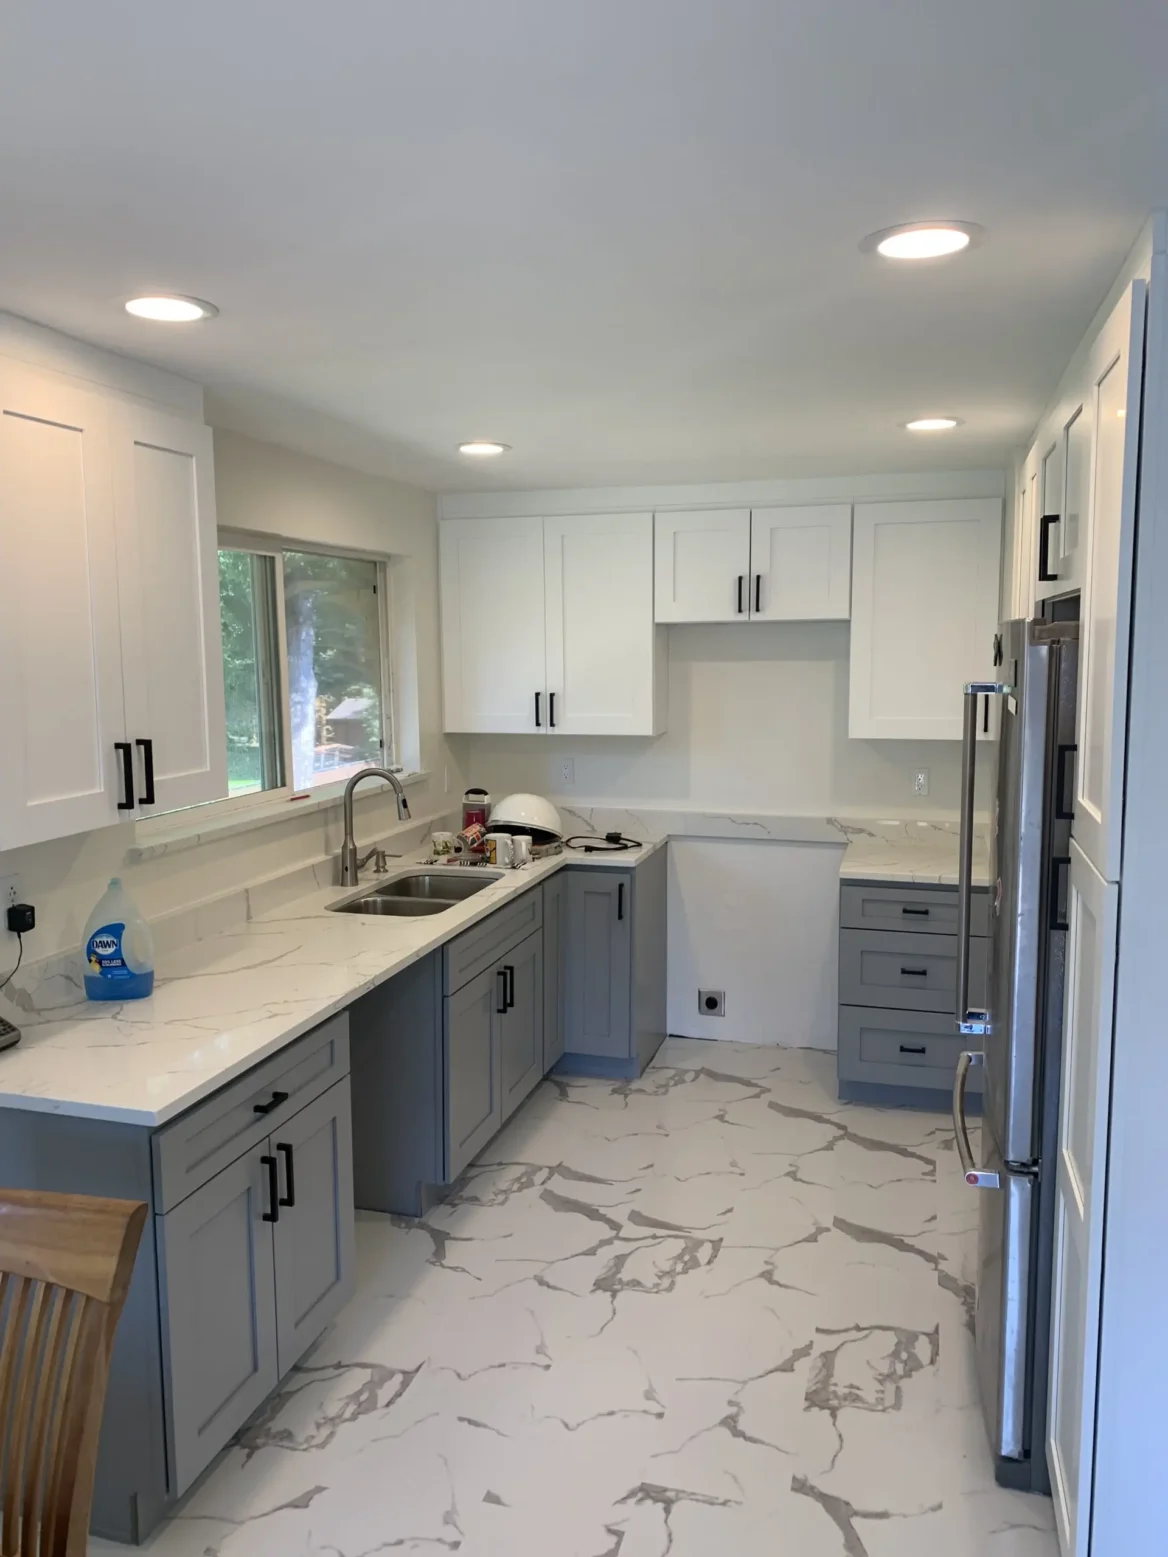 A kitchen and countertop installed by King's Renovations